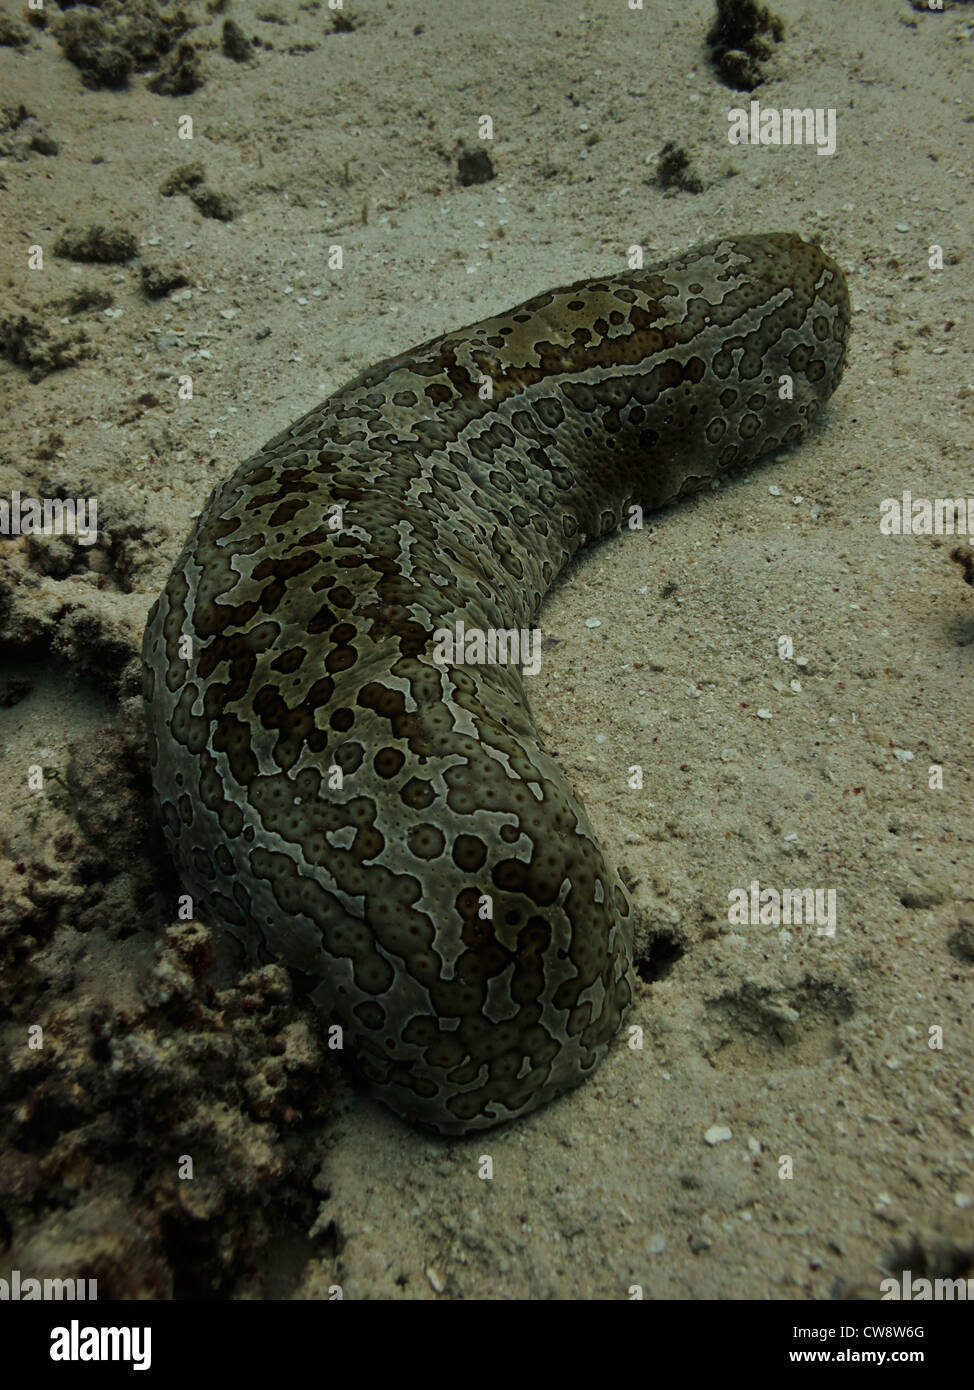 Leopard Sea Cucumber  Holothuroidea pervicax, in sand on reef floor at Great Barrier Reef Marine Park Australia Stock Photo